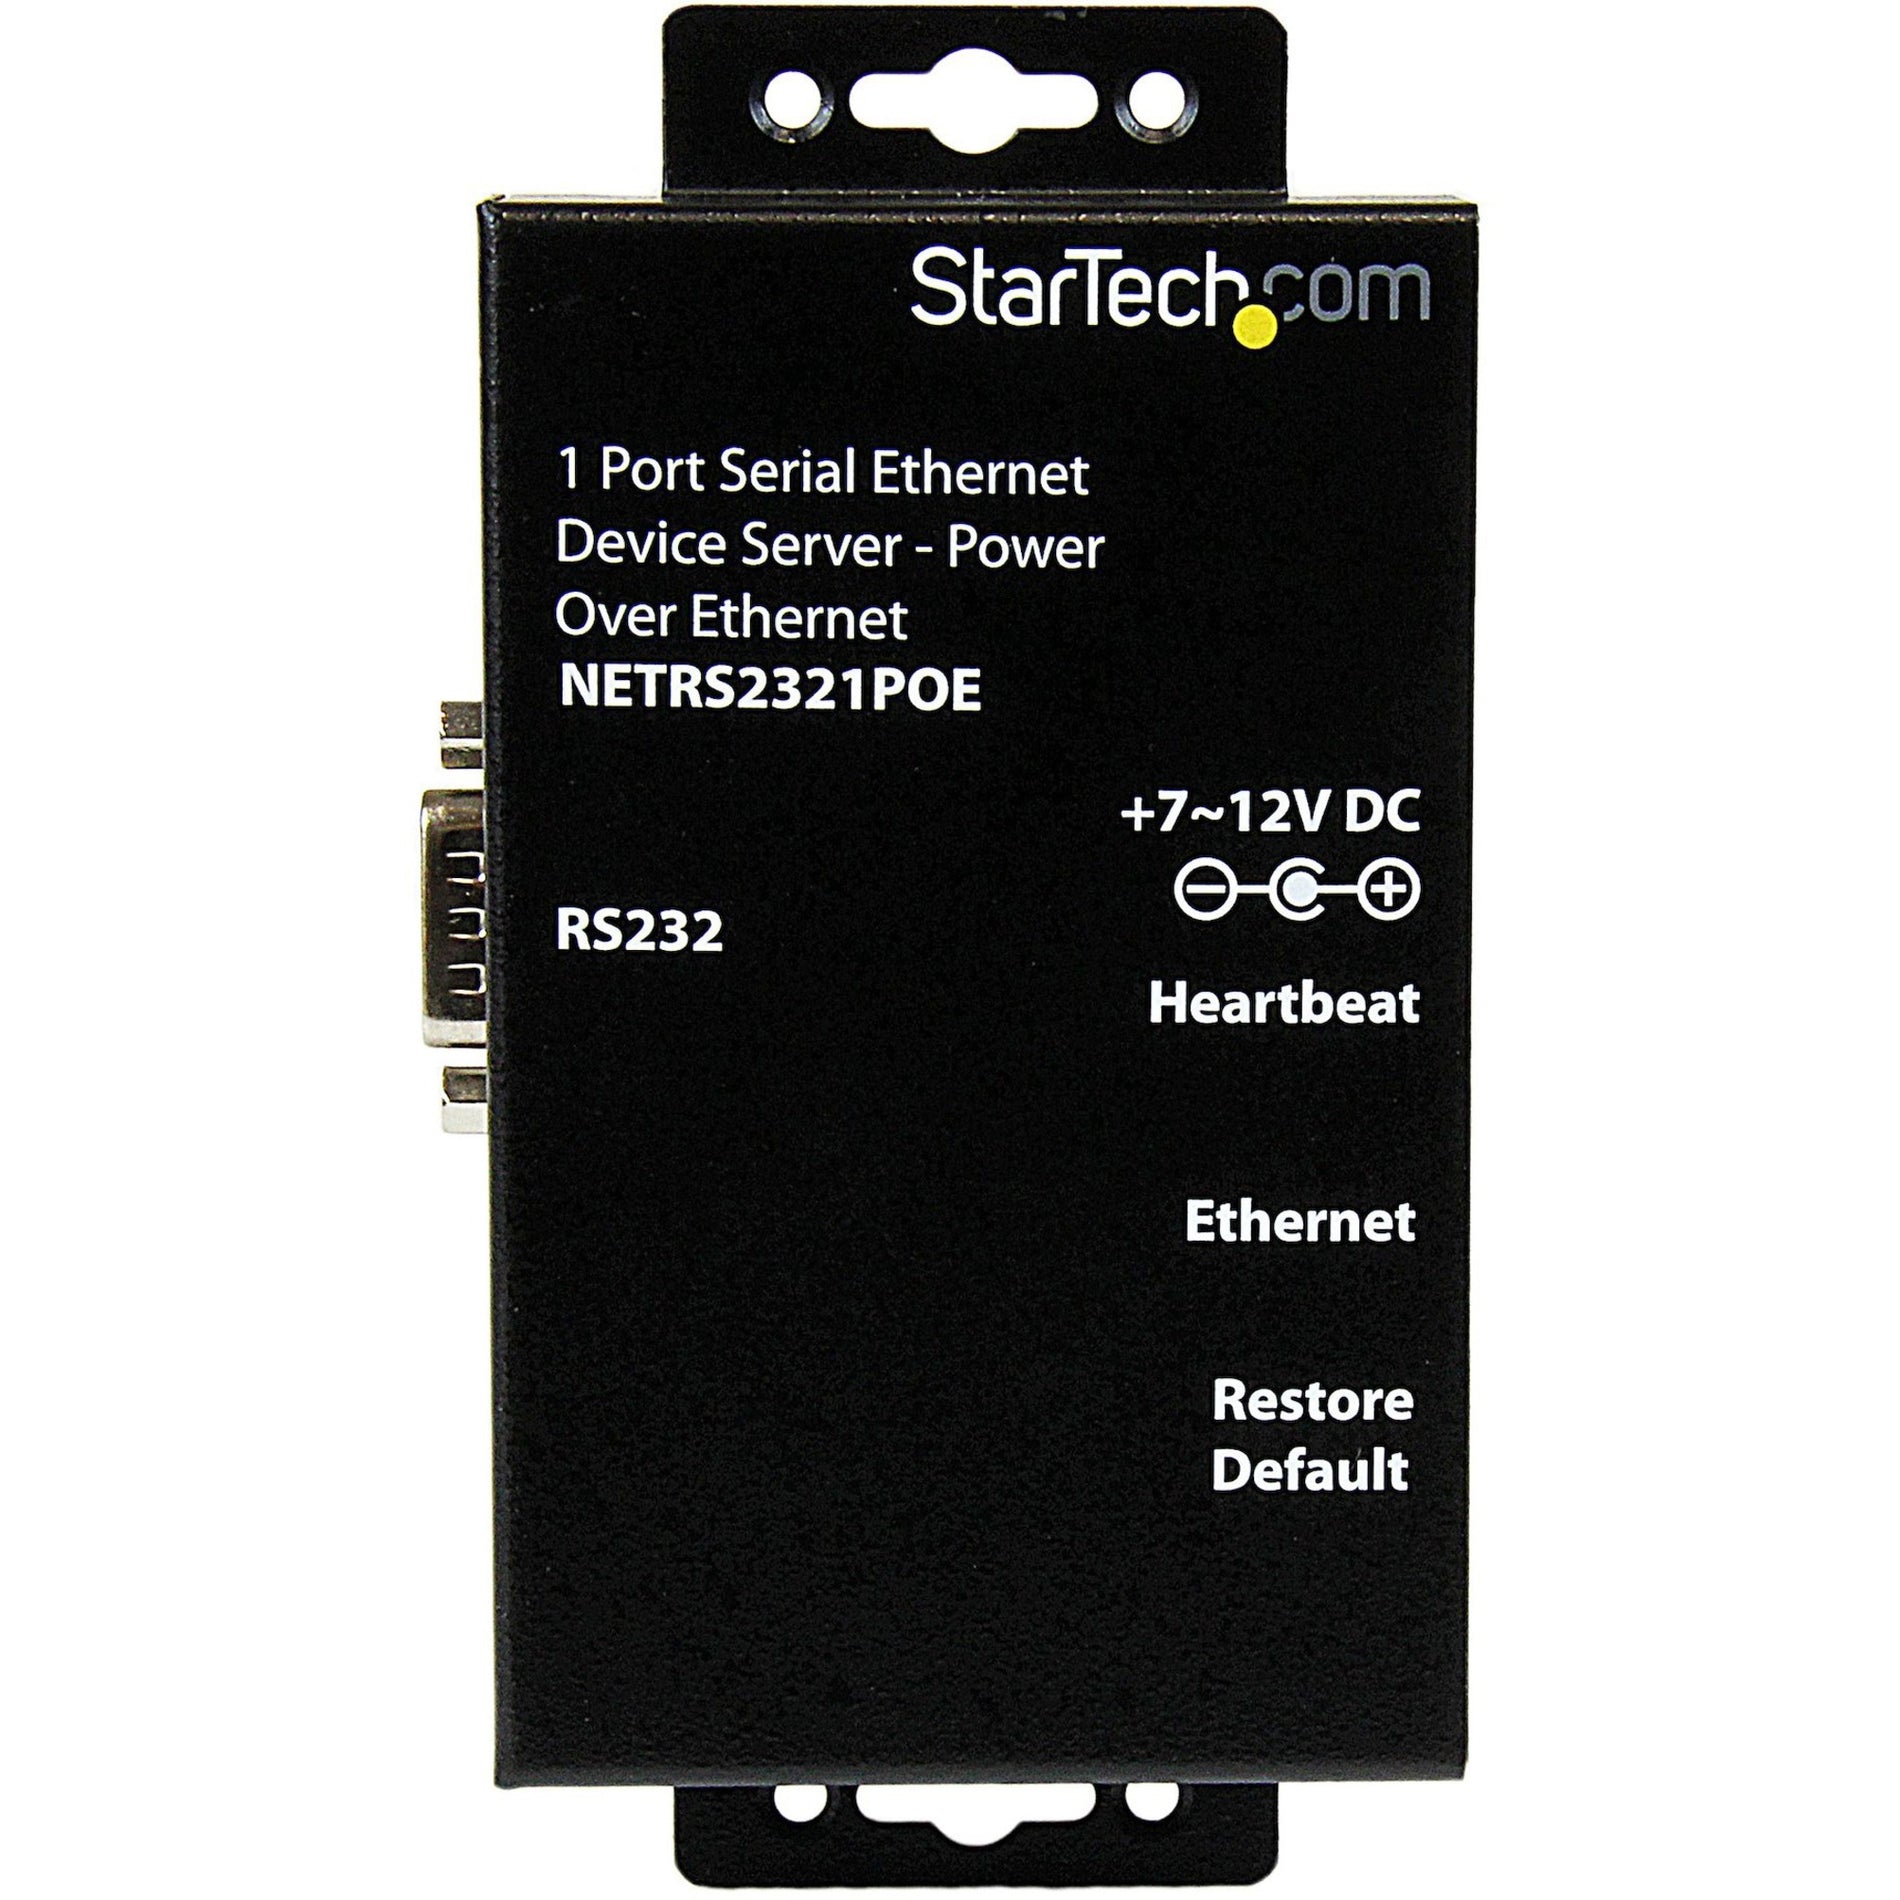 StarTech.com NETRS2321POE 1 Port RS232 Serial Ethernet Device Server - PoE Power Over Ethernet, TAA Compliant, 2 Year Warranty [Discontinued]